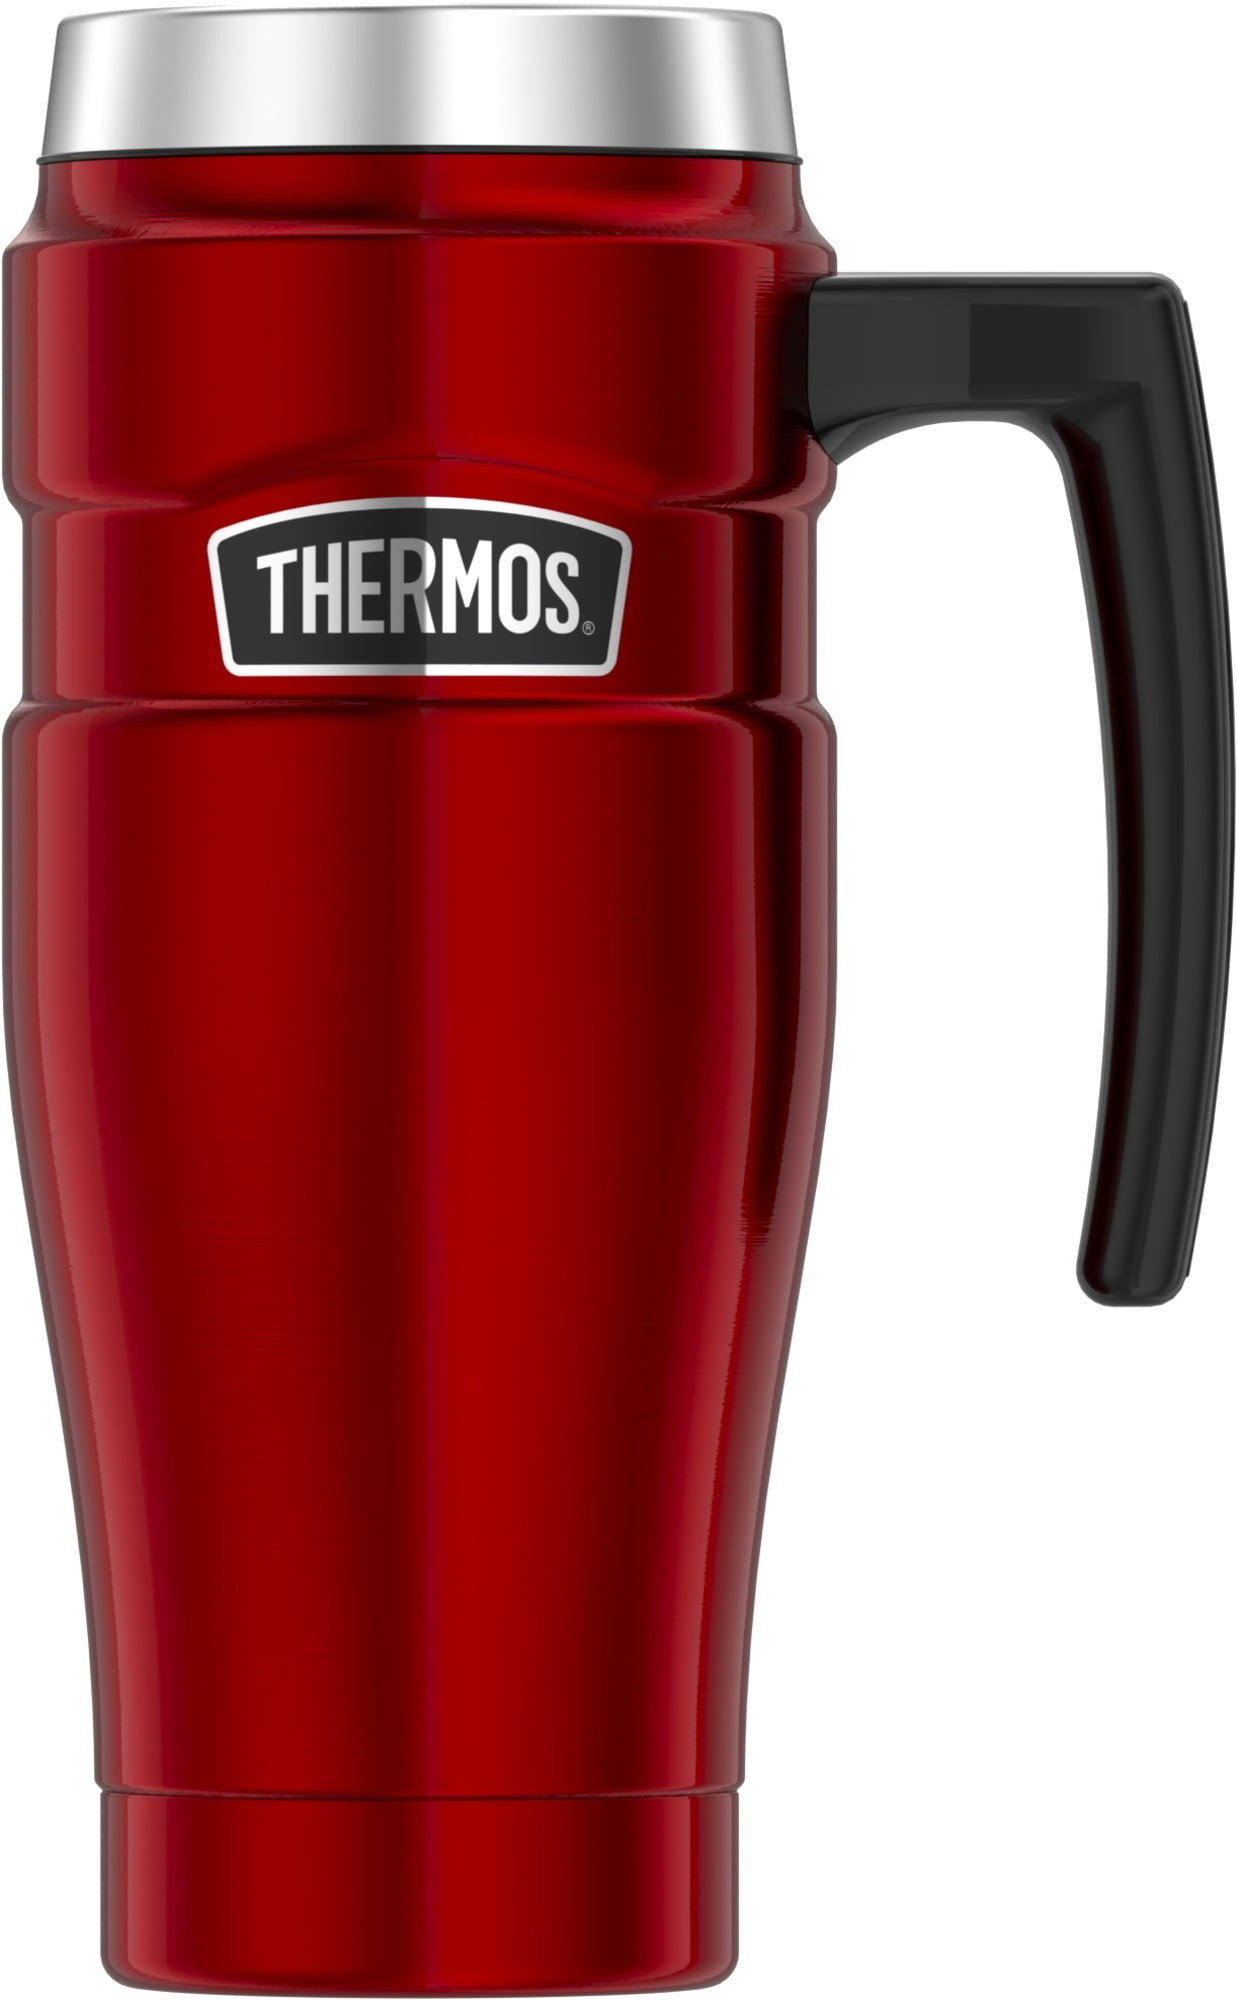 Thermos 16OZ Stainless King Travel Mug, Red Cranberry 